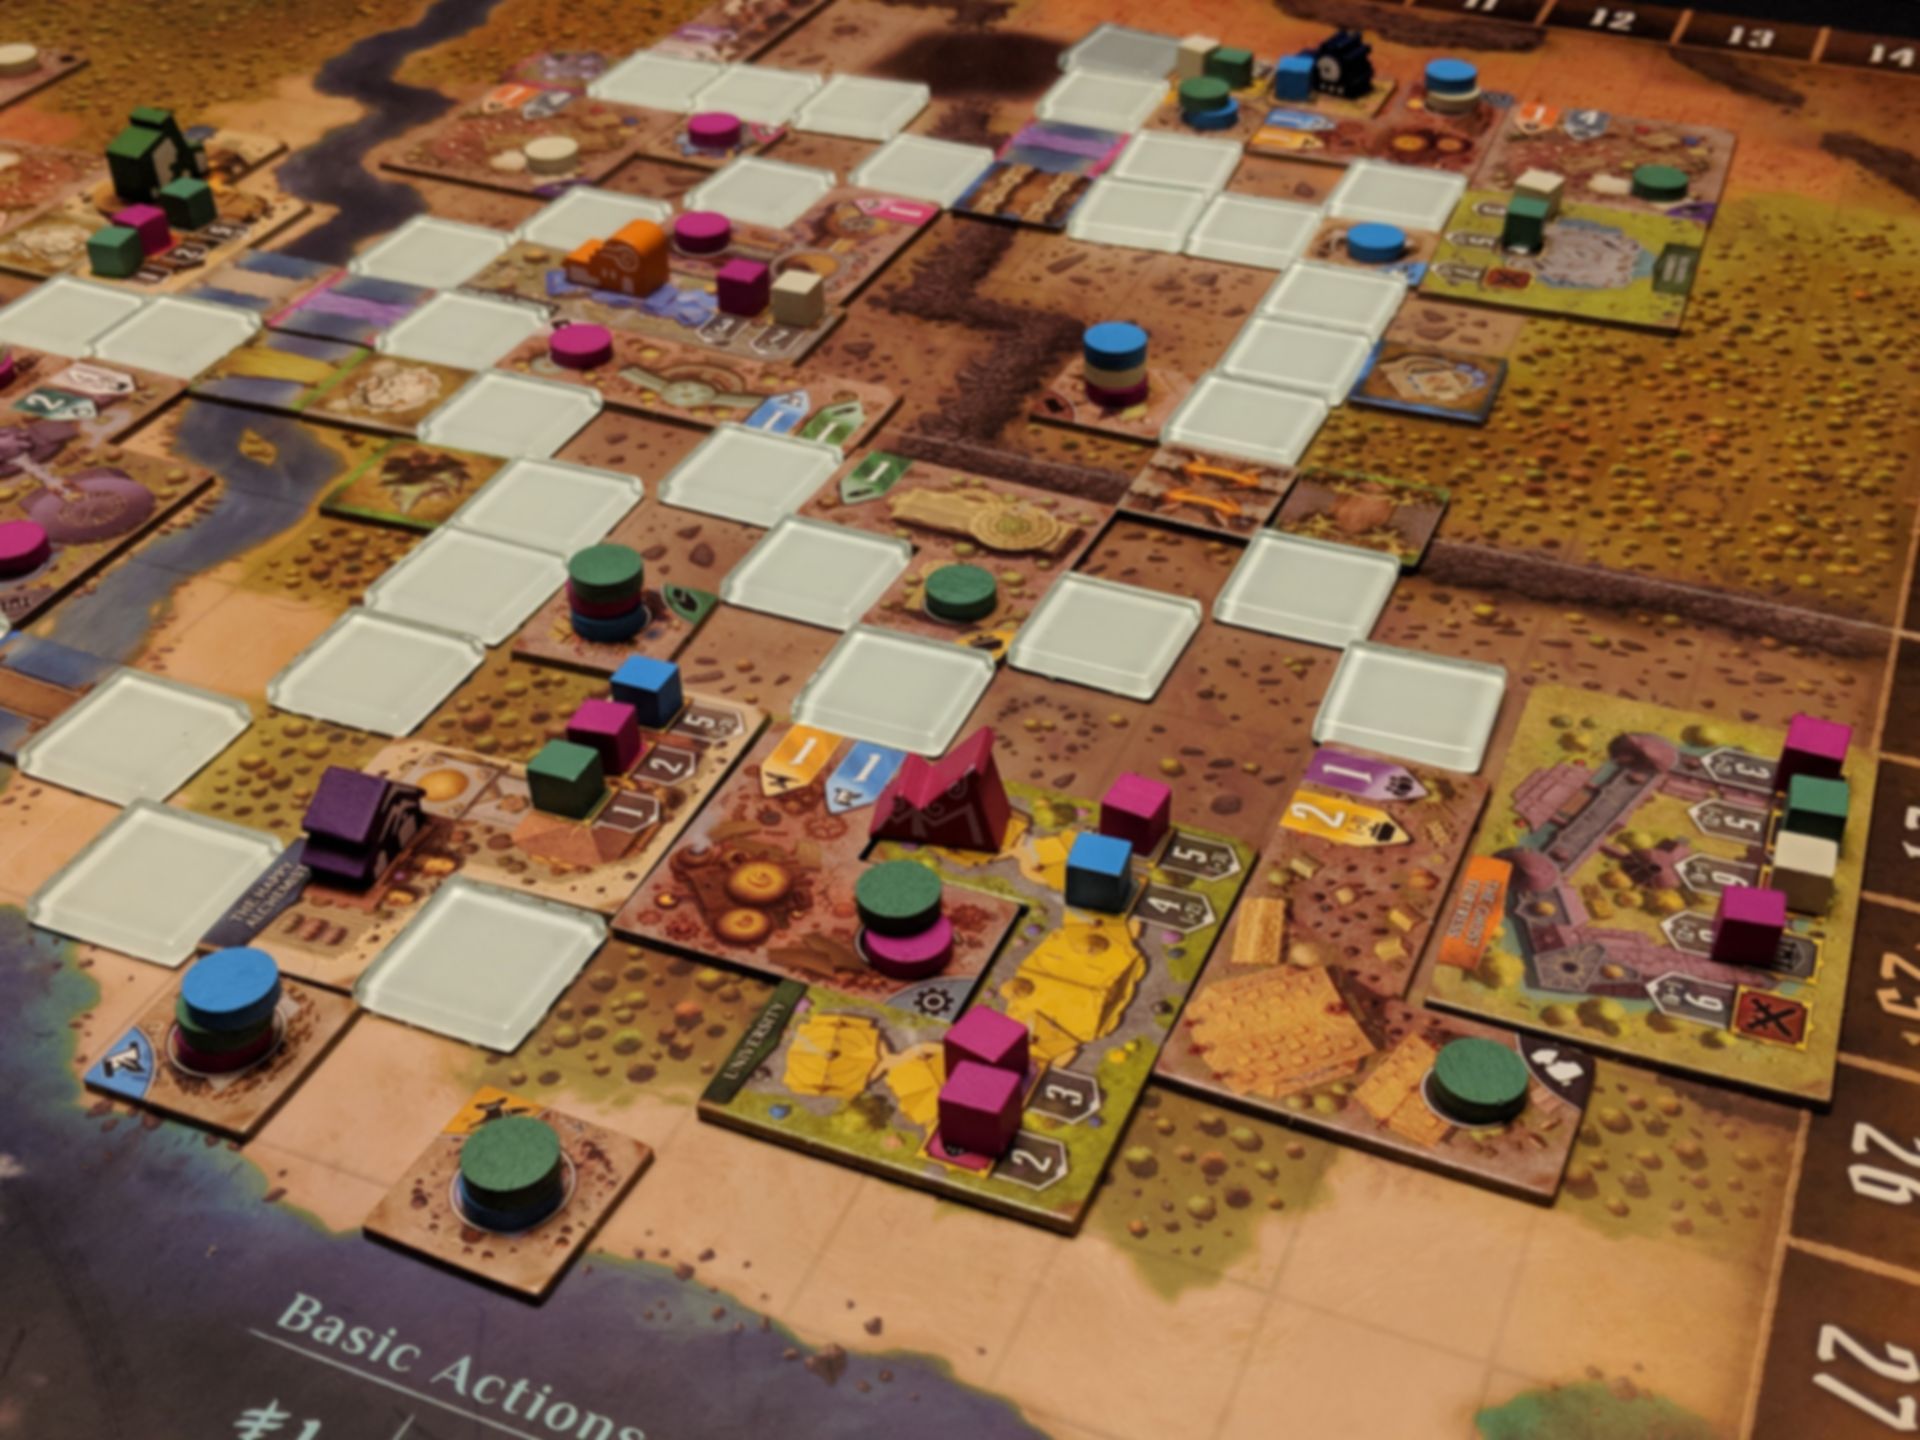 Founders of Gloomhaven gameplay